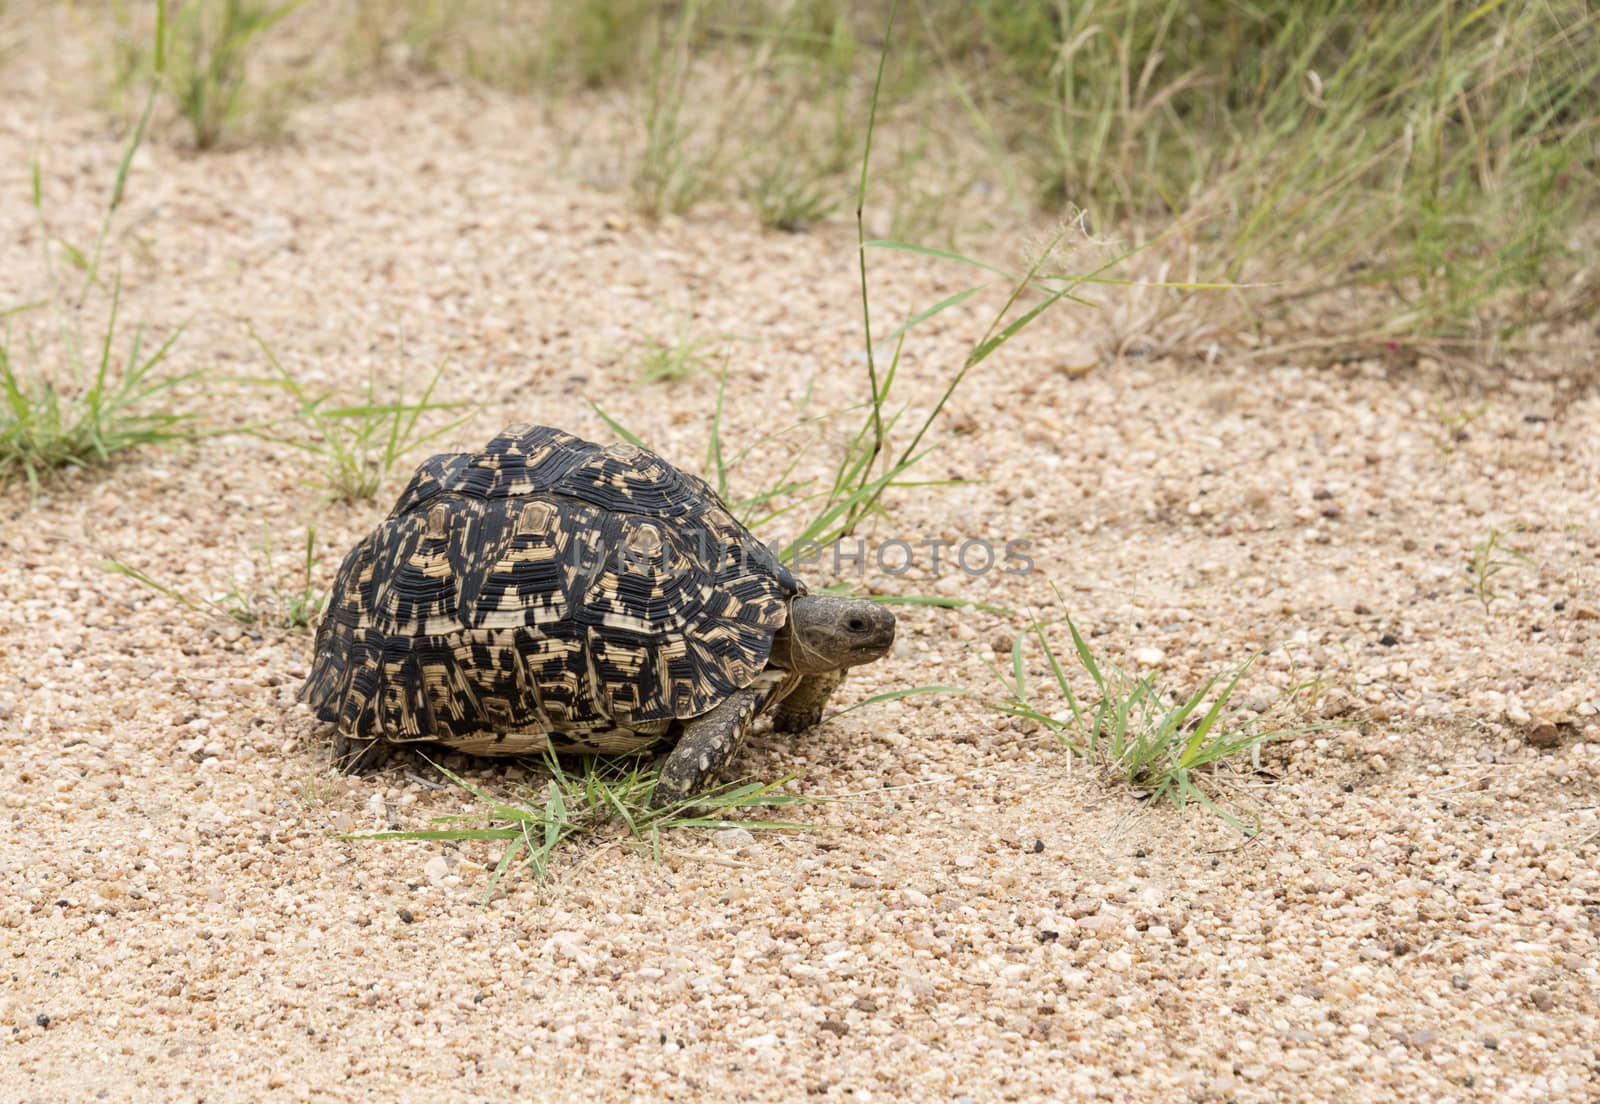 A Tortoise Land Turtle crossing the road in the Kruger Park, South Africa